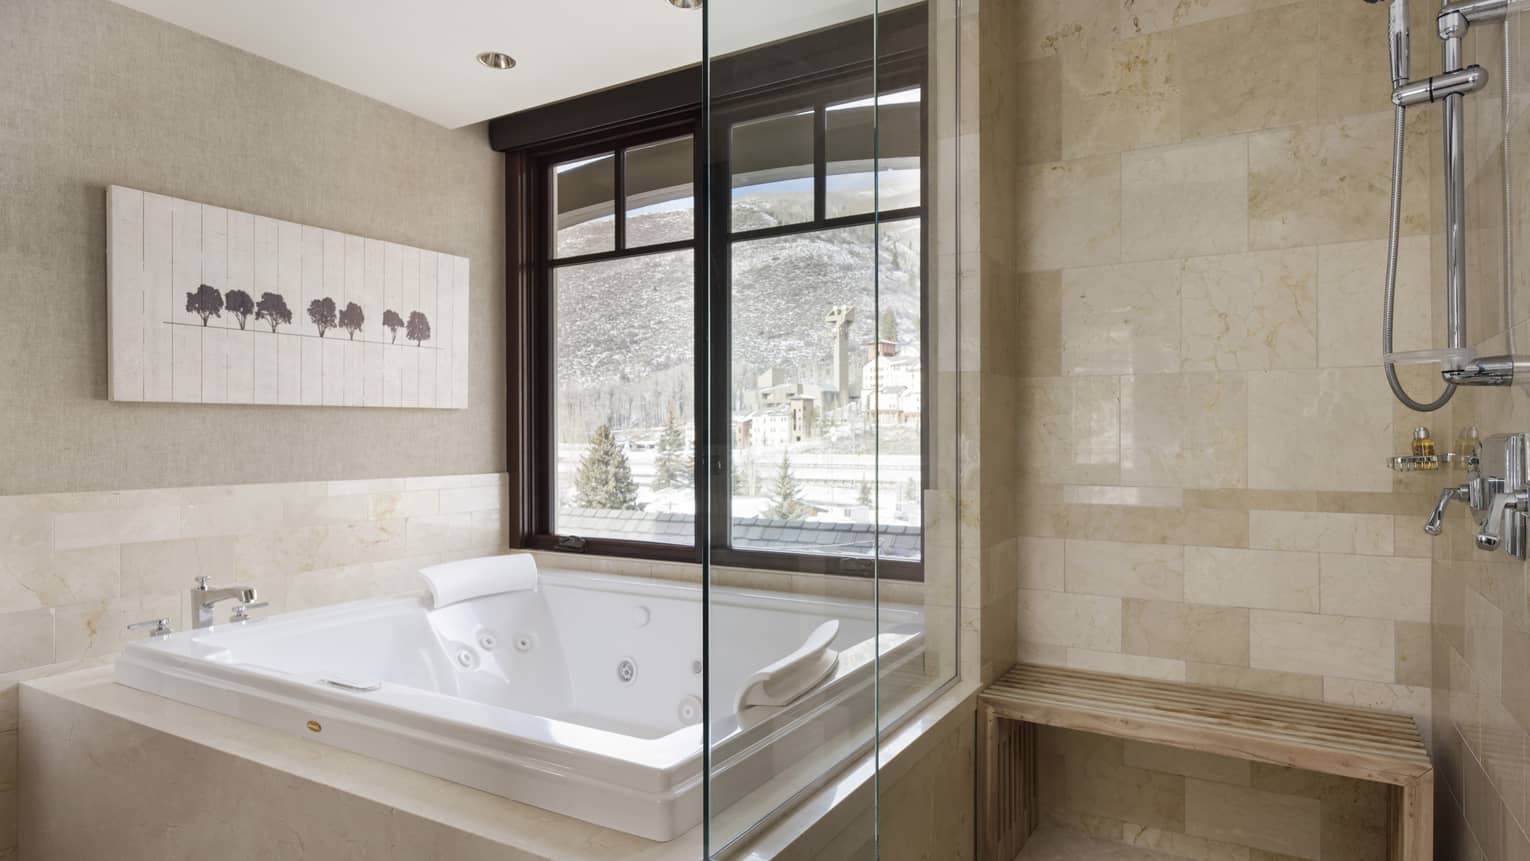 Bathroom with light stone tiled shower, sunken square jetted tub